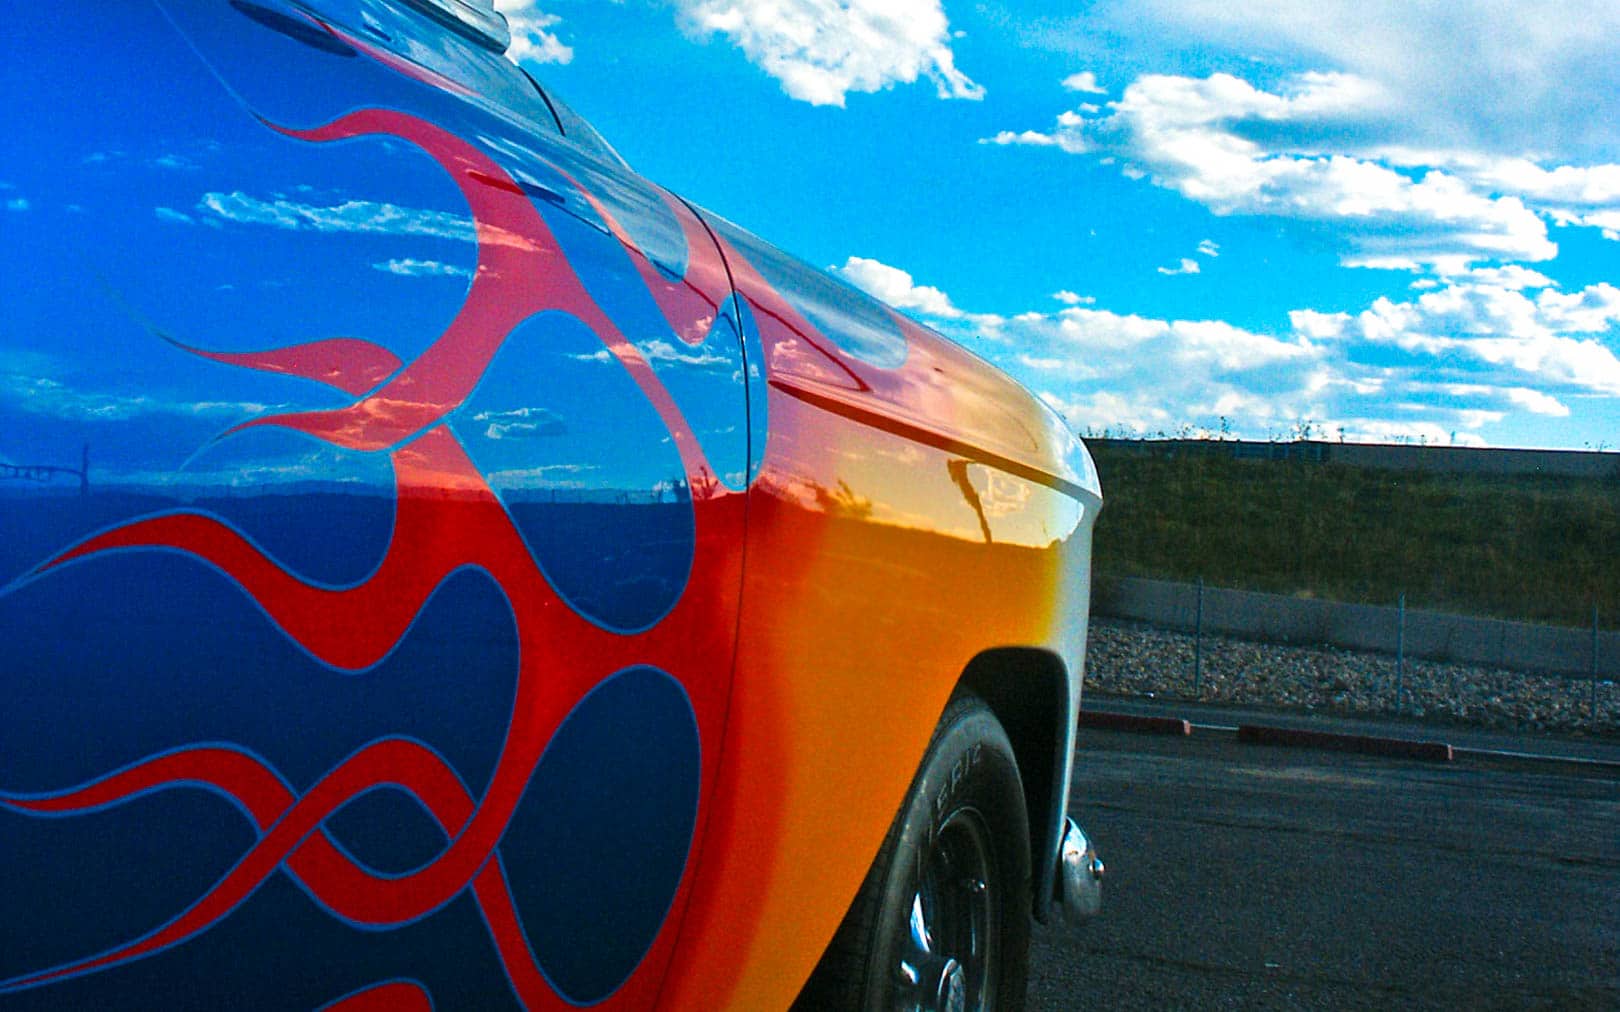 Make Your Classy Ride Truly Stand Out with Vintage Vinyl Wrapping